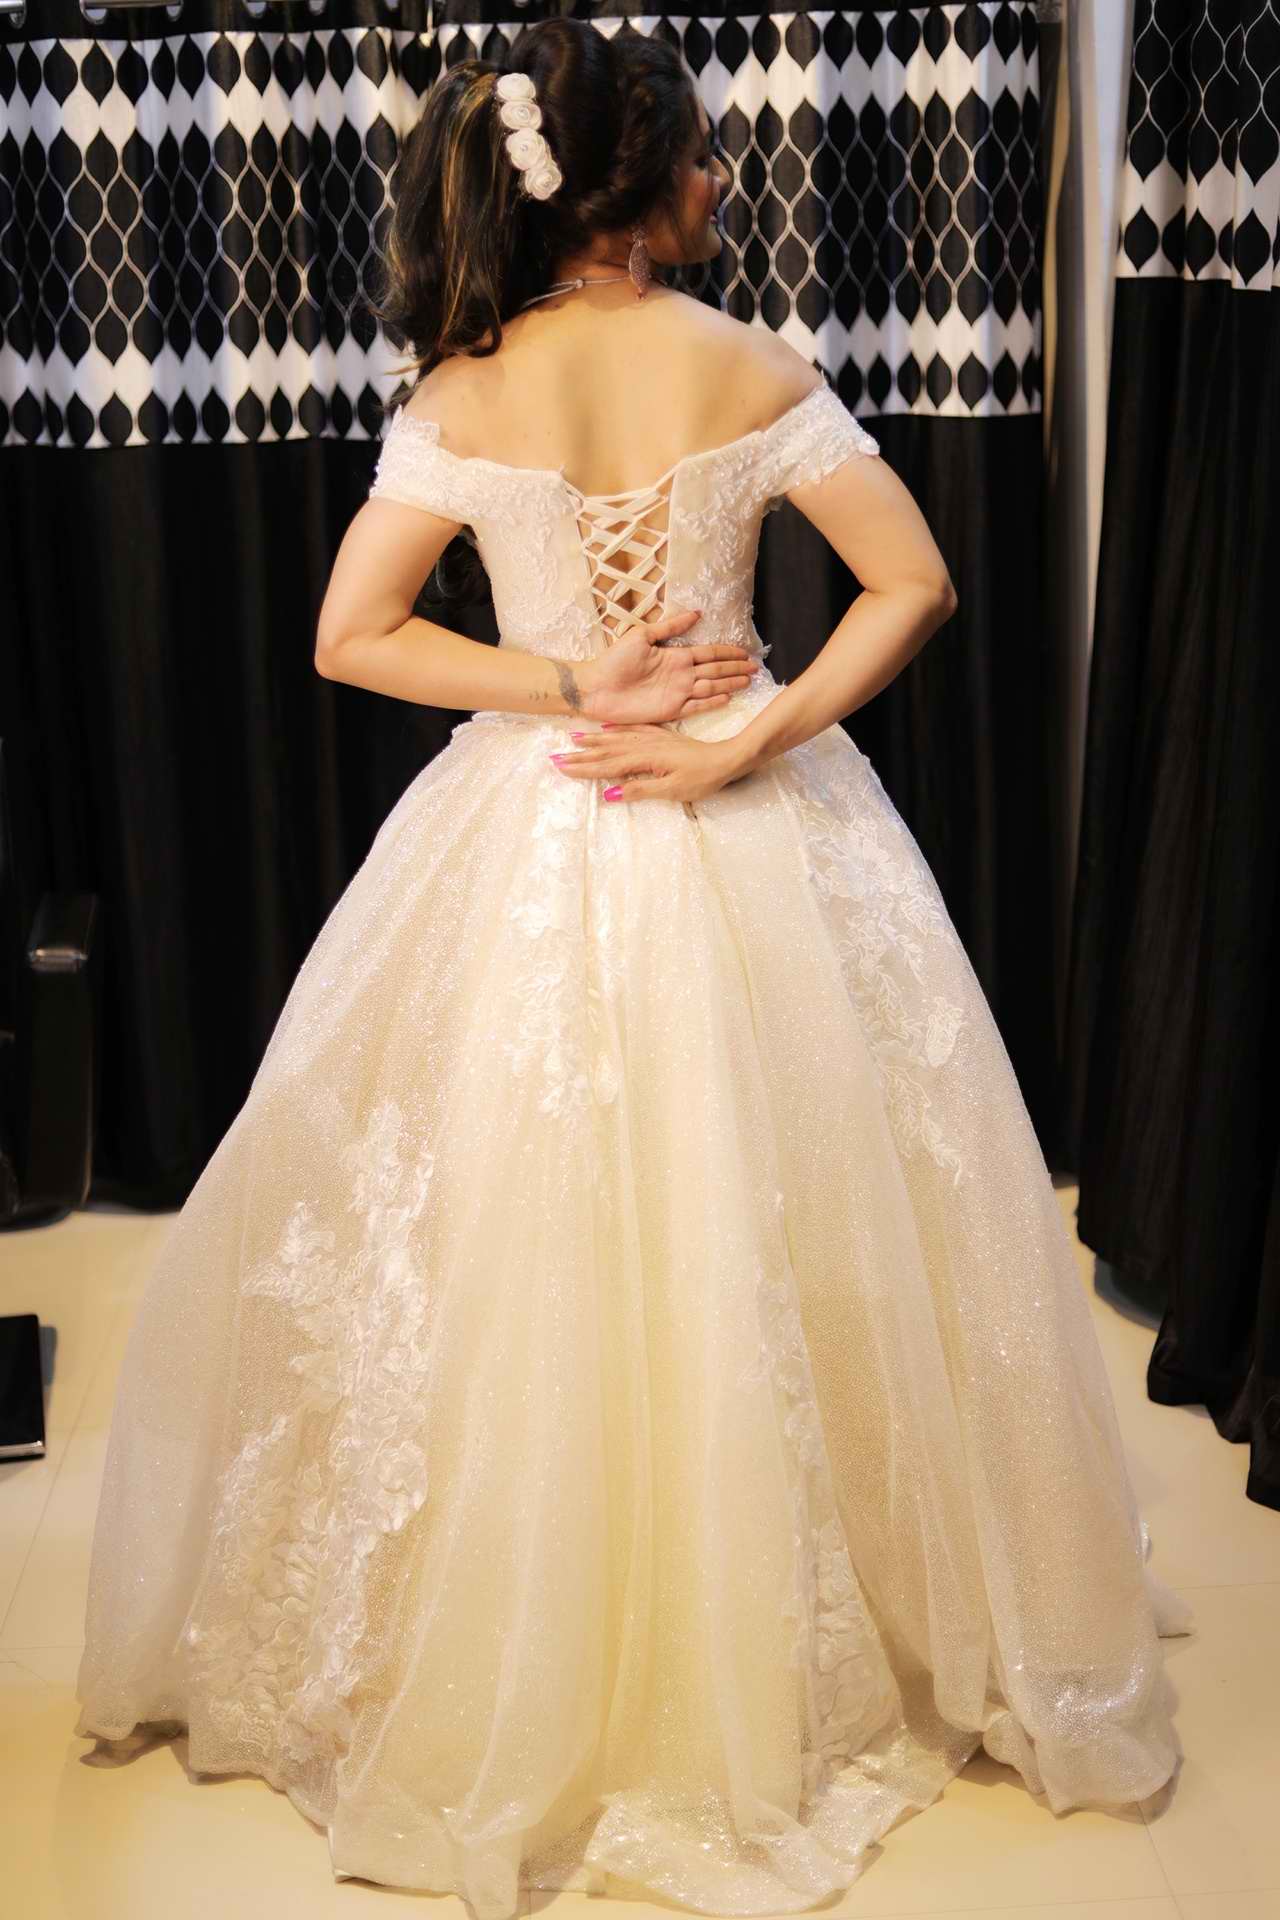 Handmade 3D Floral Applique Superb Huge Ballgown Wedding Dress With Puffy  Princess Lace Skirt And Tiered Skirts By Mak Tumang Designer From  Lilliantan, $1,355.78 | DHgate.Com